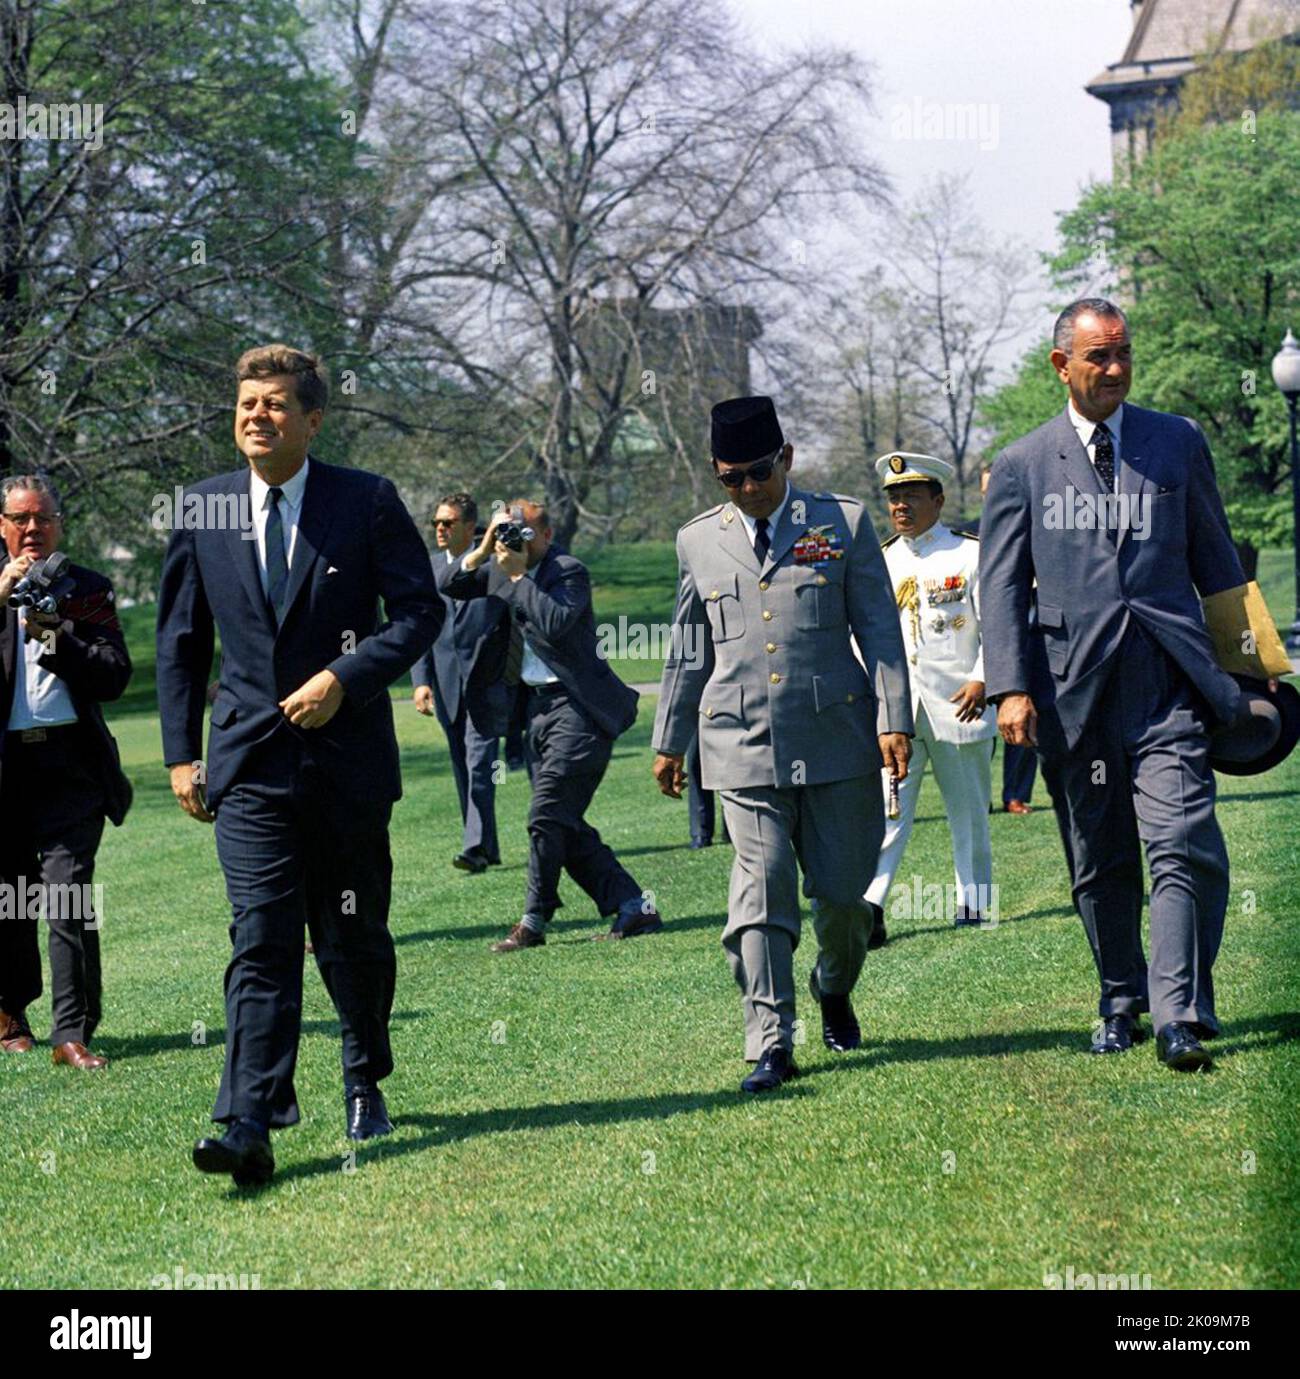 US President John Kennedy, Indonesian President Sukarno, and U.S. Vice-President Johnson on the South Lawn of the White House, April 25, 1961. Stock Photo